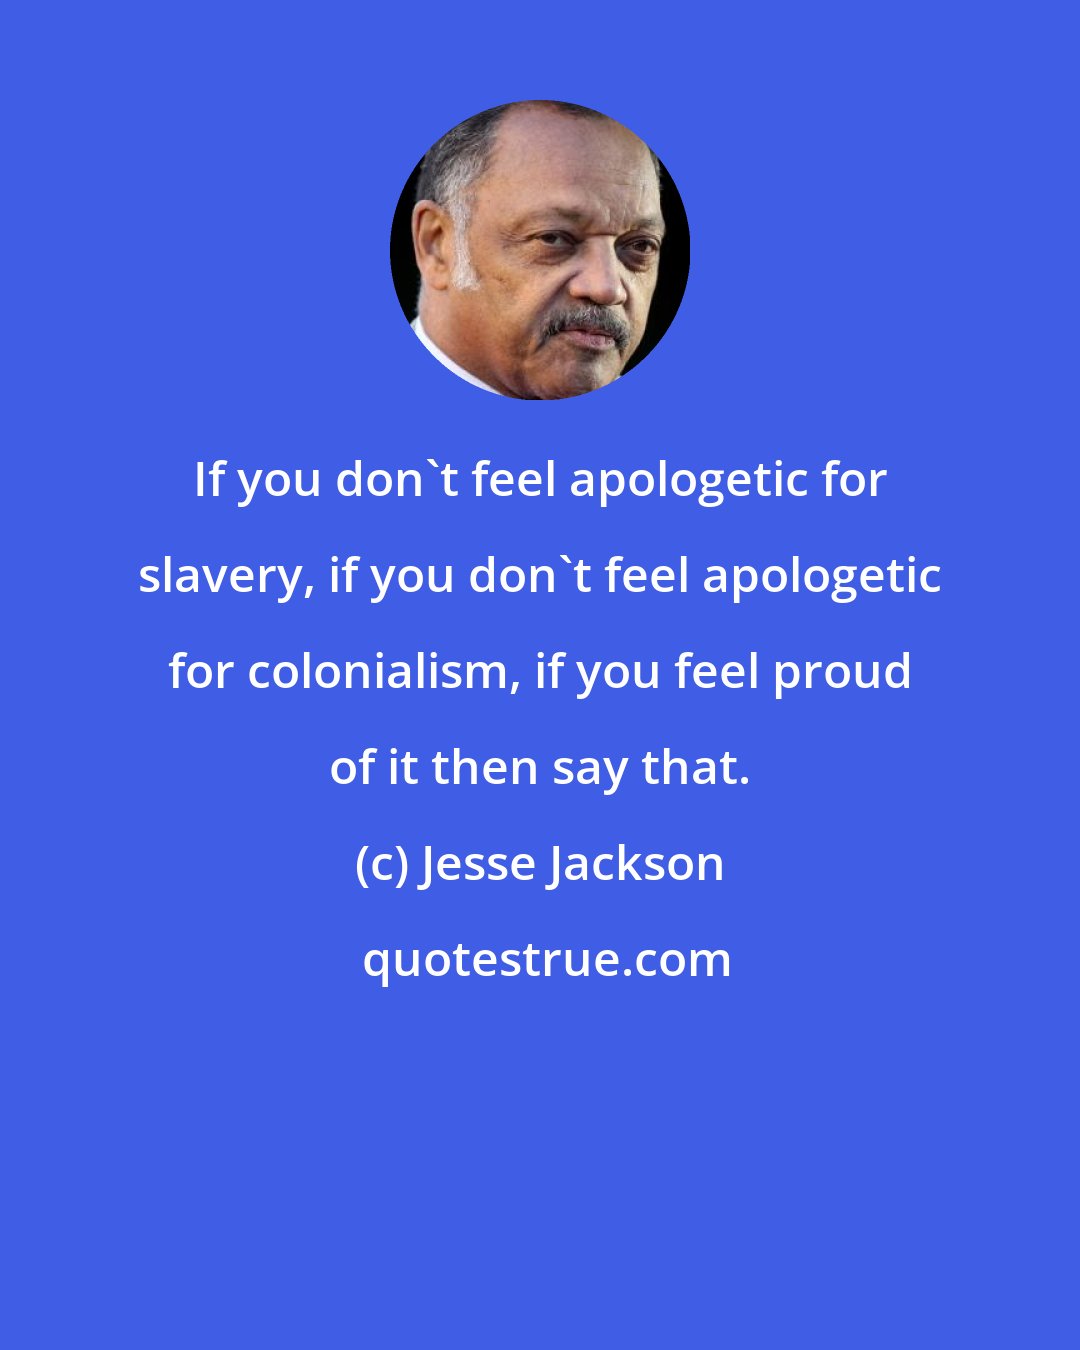 Jesse Jackson: If you don't feel apologetic for slavery, if you don't feel apologetic for colonialism, if you feel proud of it then say that.